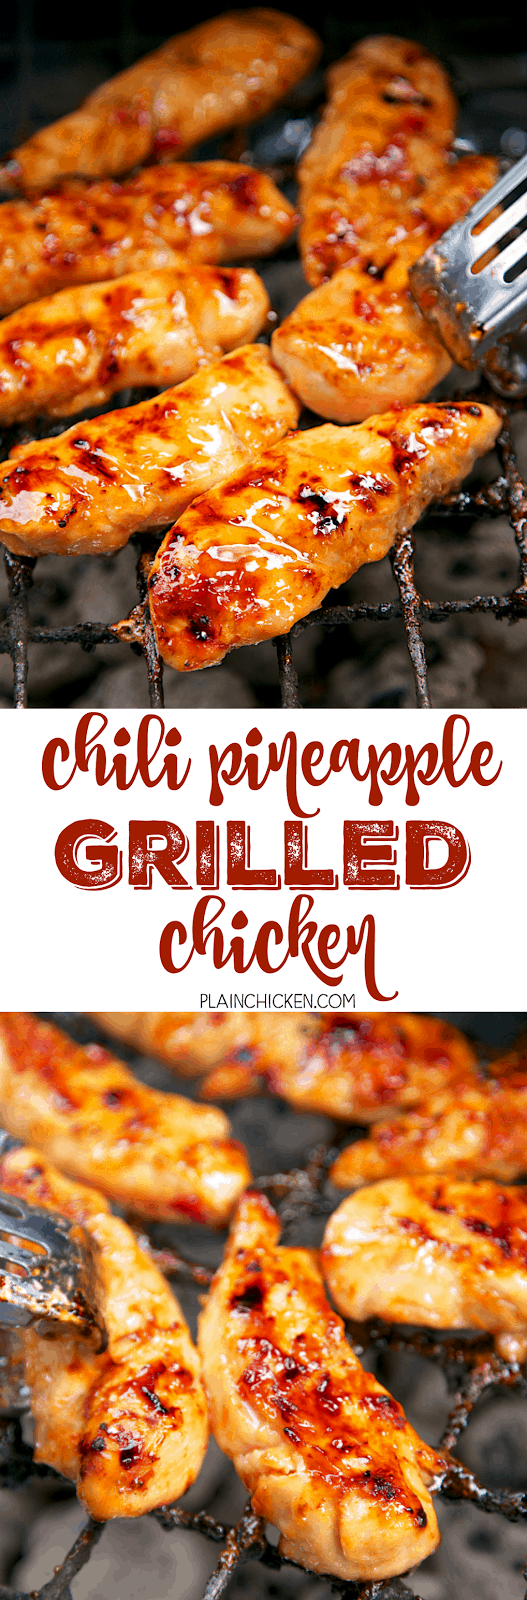 Chili Pineapple Grilled Chicken - only simple 4 ingredients! Chicken, chili sauce, pineapple juice and honey. TONS of great flavor!! We ate this chicken 2 days in a row!